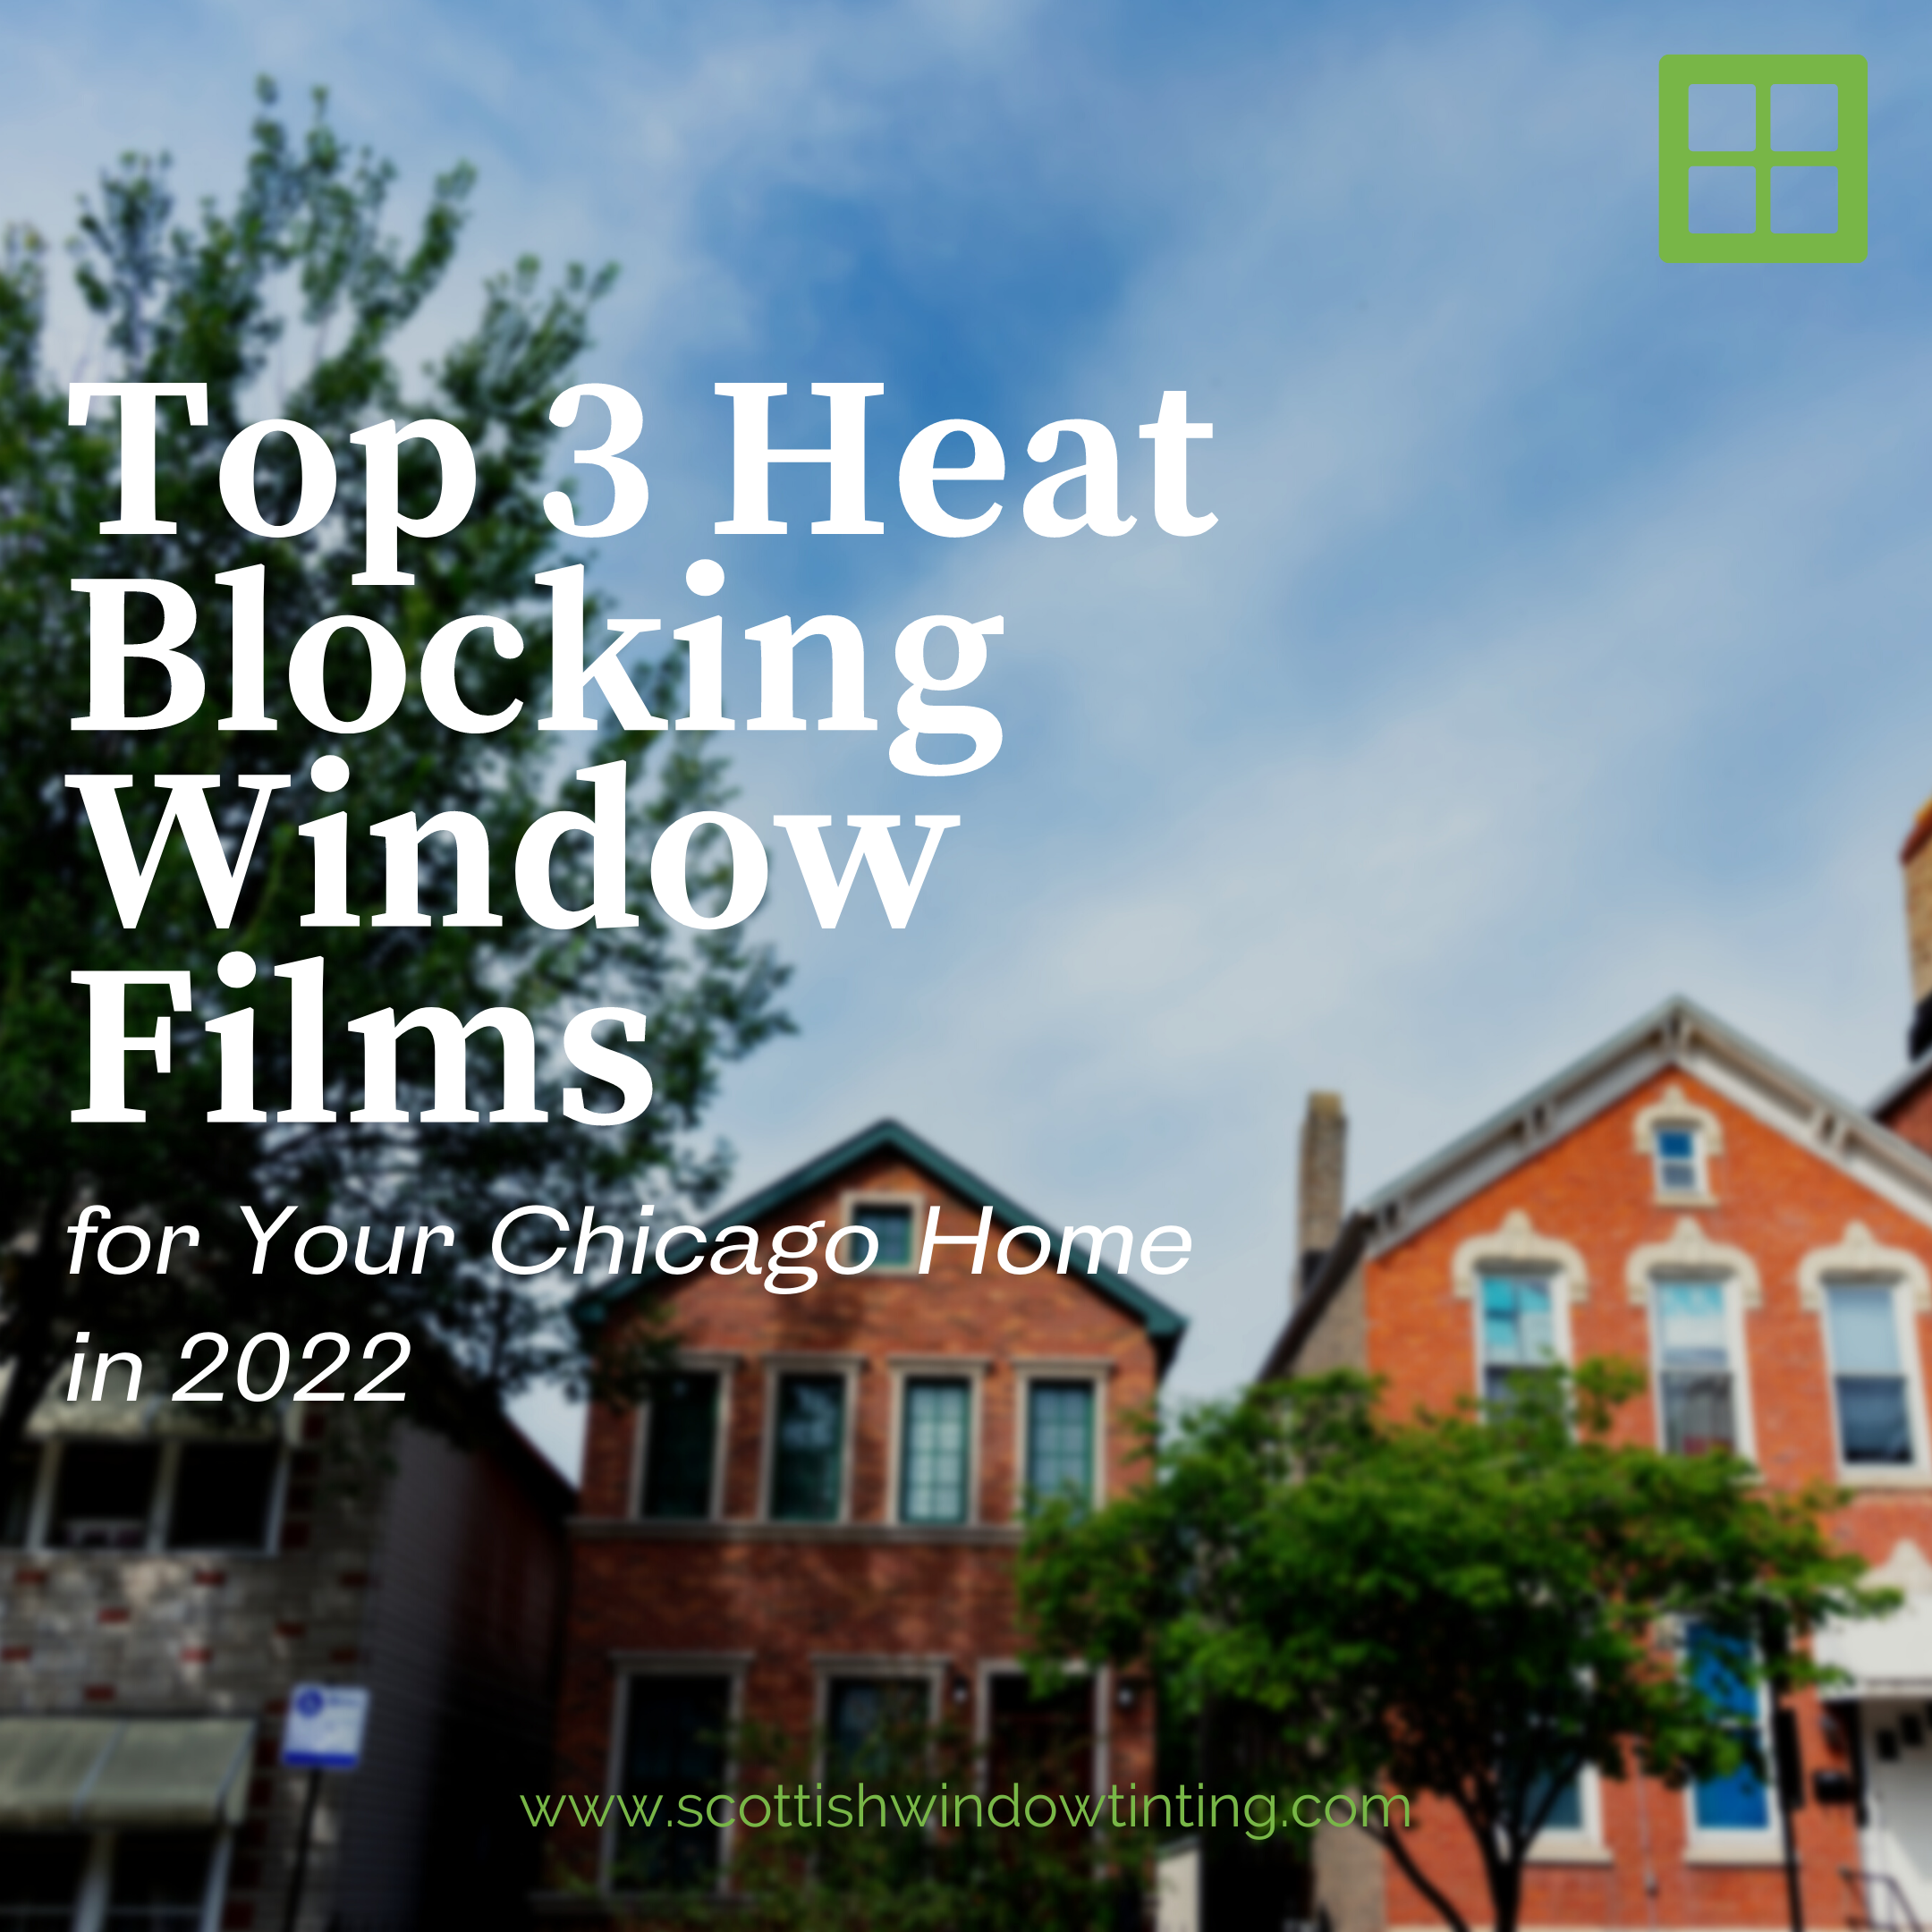 Top 3 Heat Blocking Window Films for Your Chicago Home in 2022